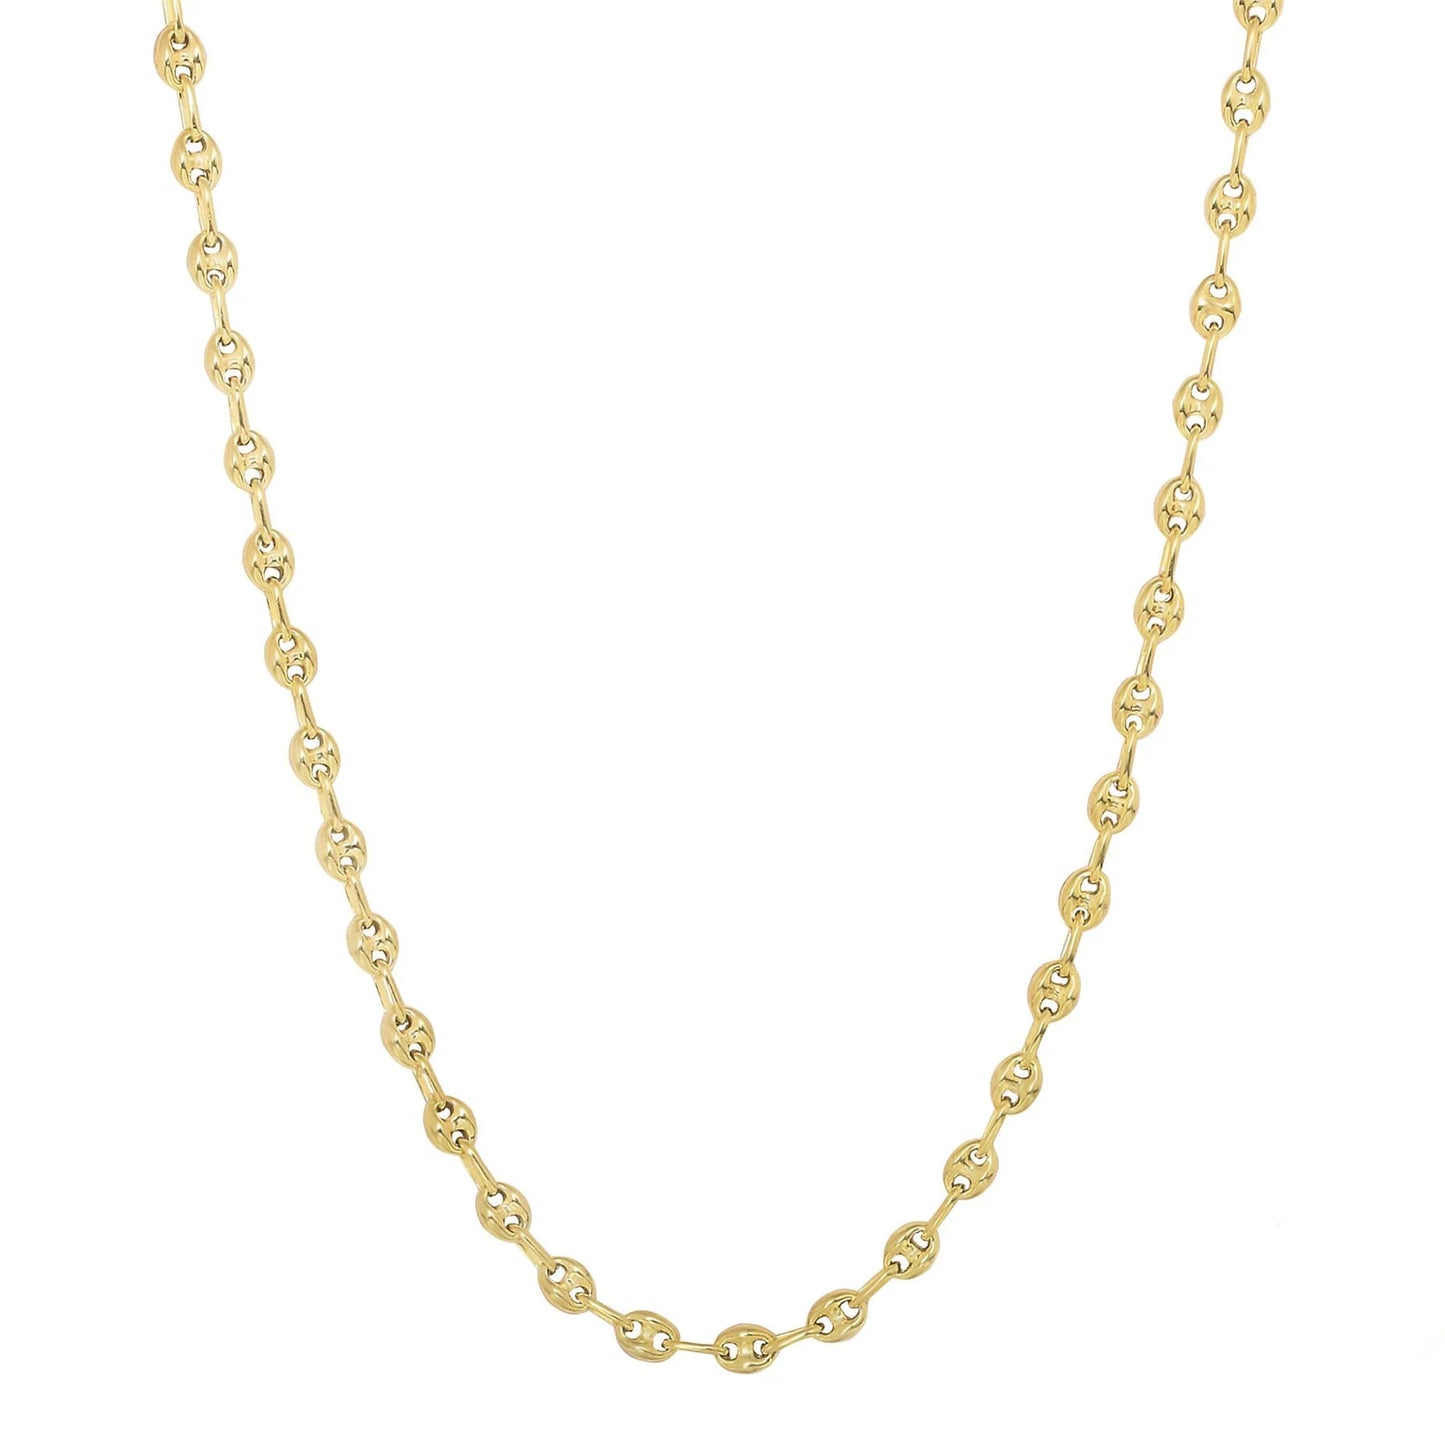 18K GOLD FILLED 4MM GUCCI MARINER CHAIN